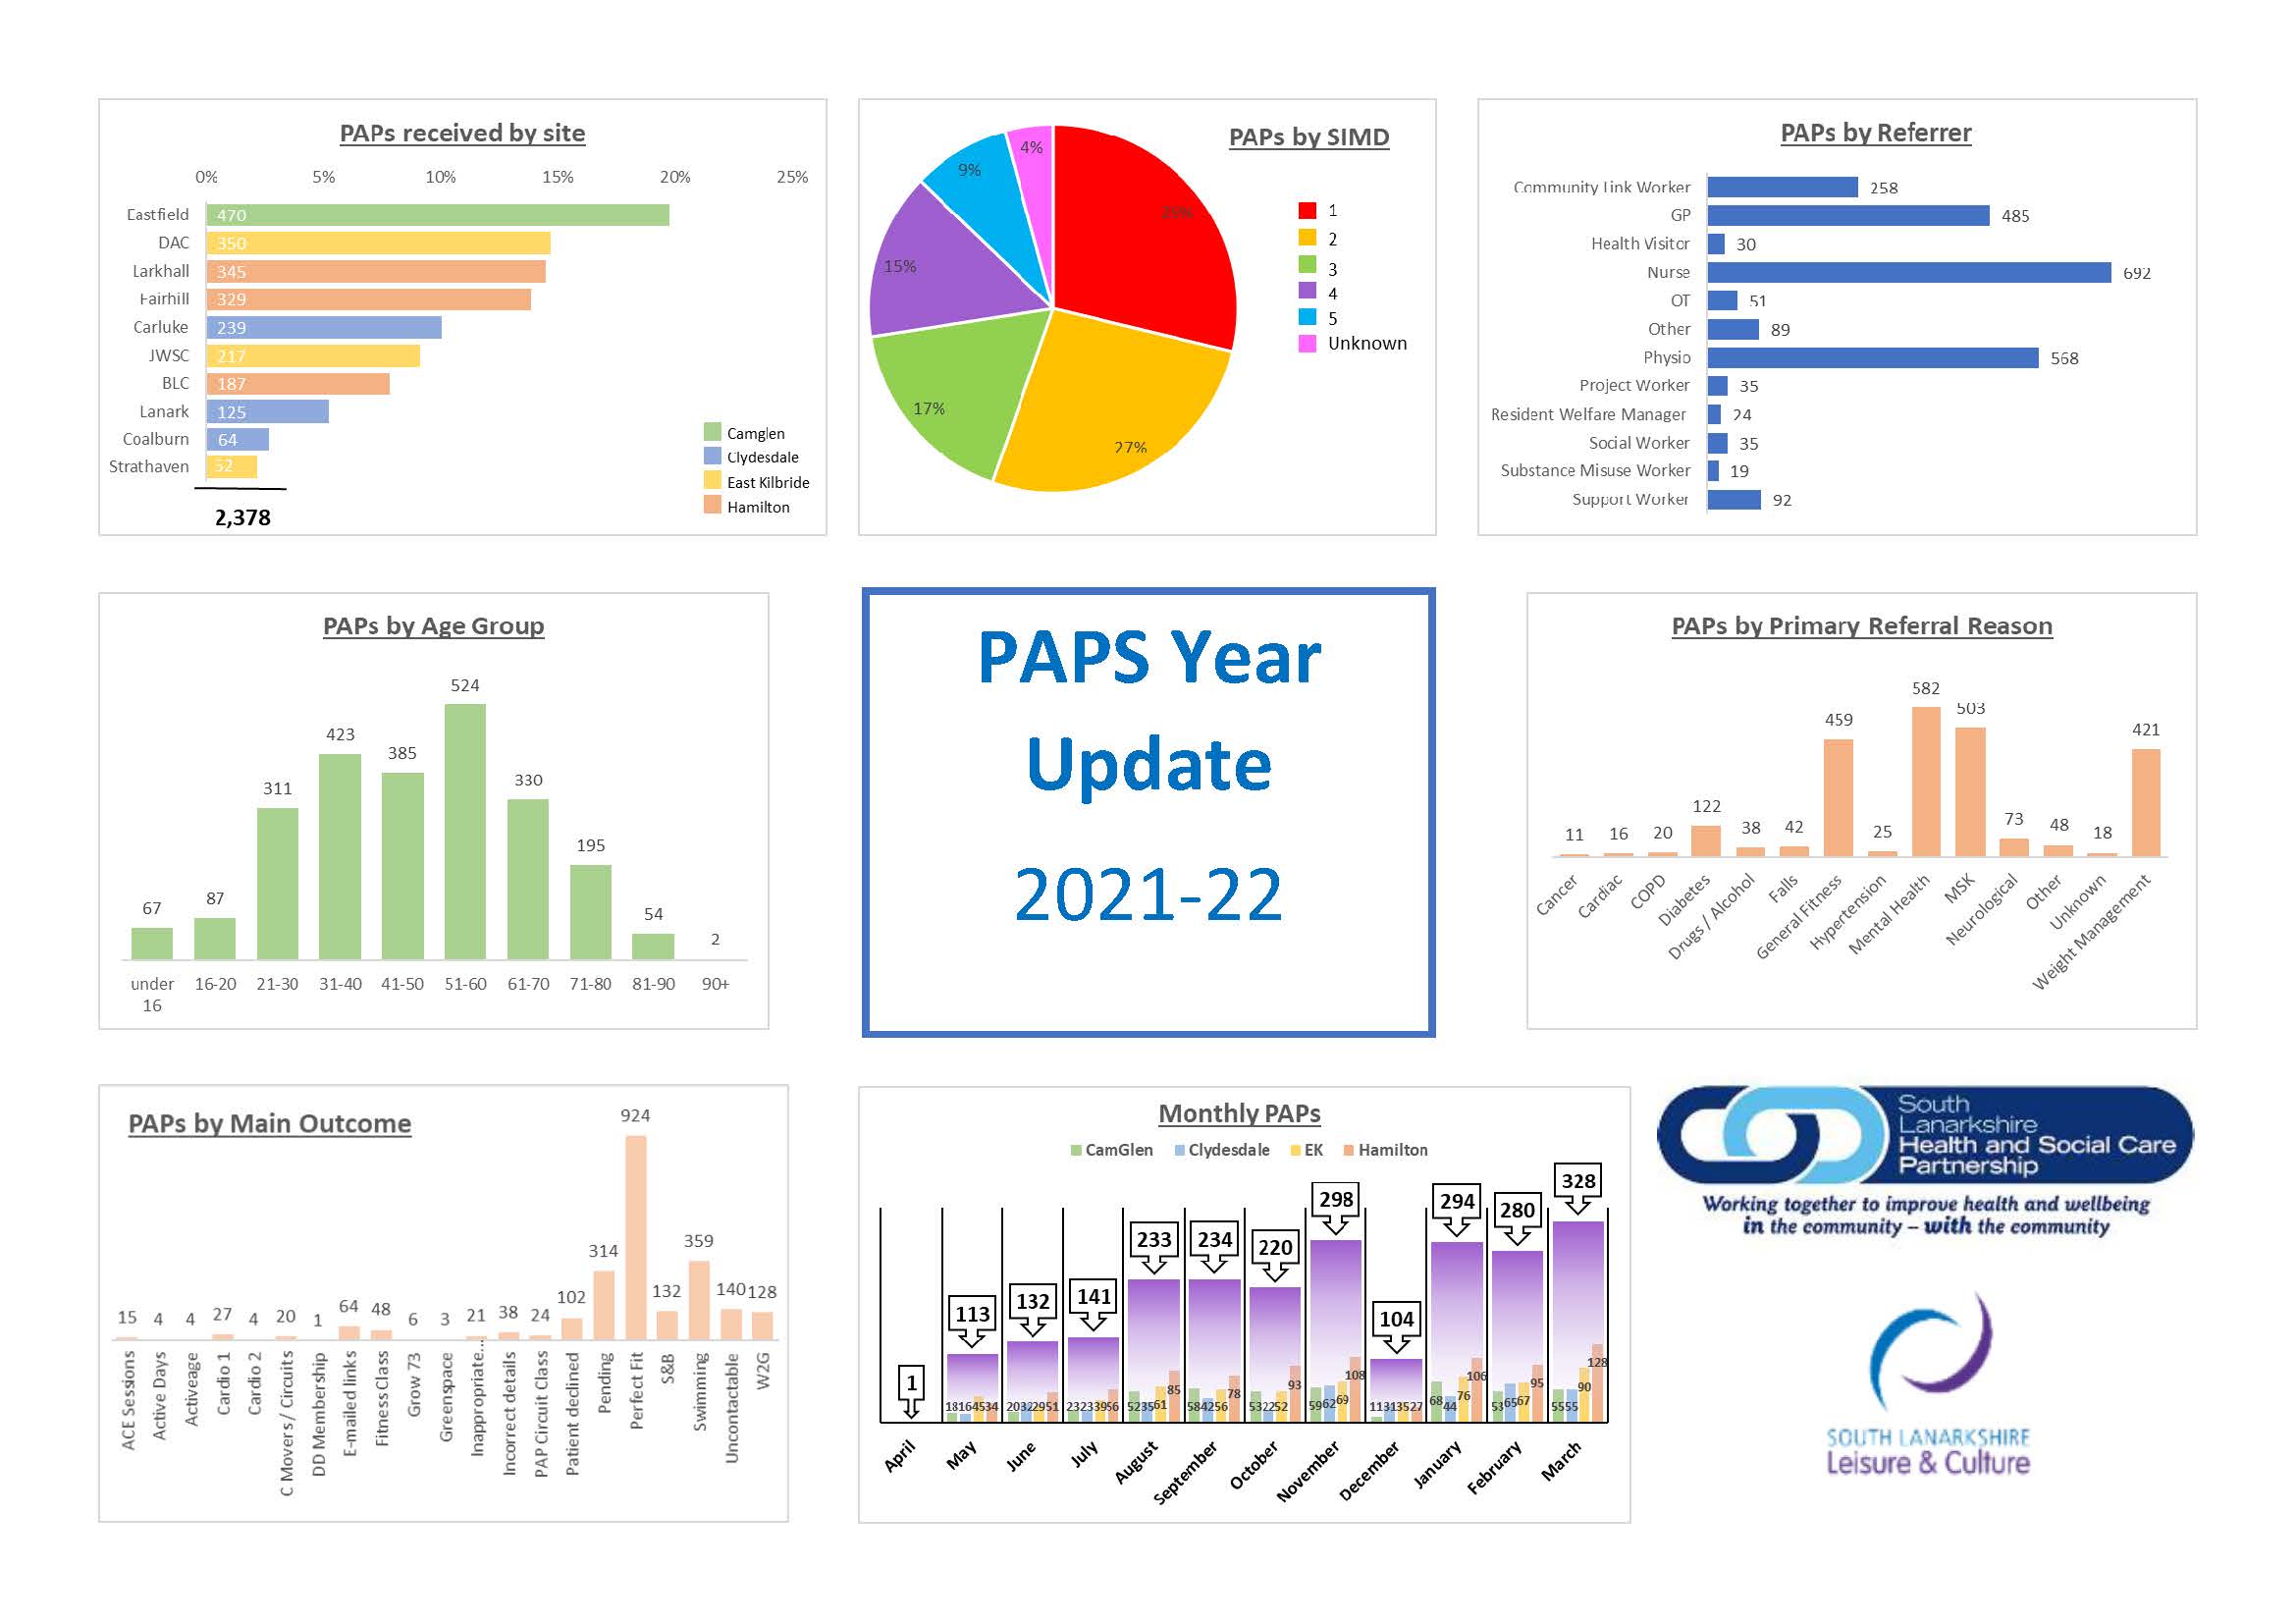 PAPs summary information for 2021-2022, showing breakdown by site, SIMD, referrer, age group, primary referral reason, main outcome, and monthly PAPs received